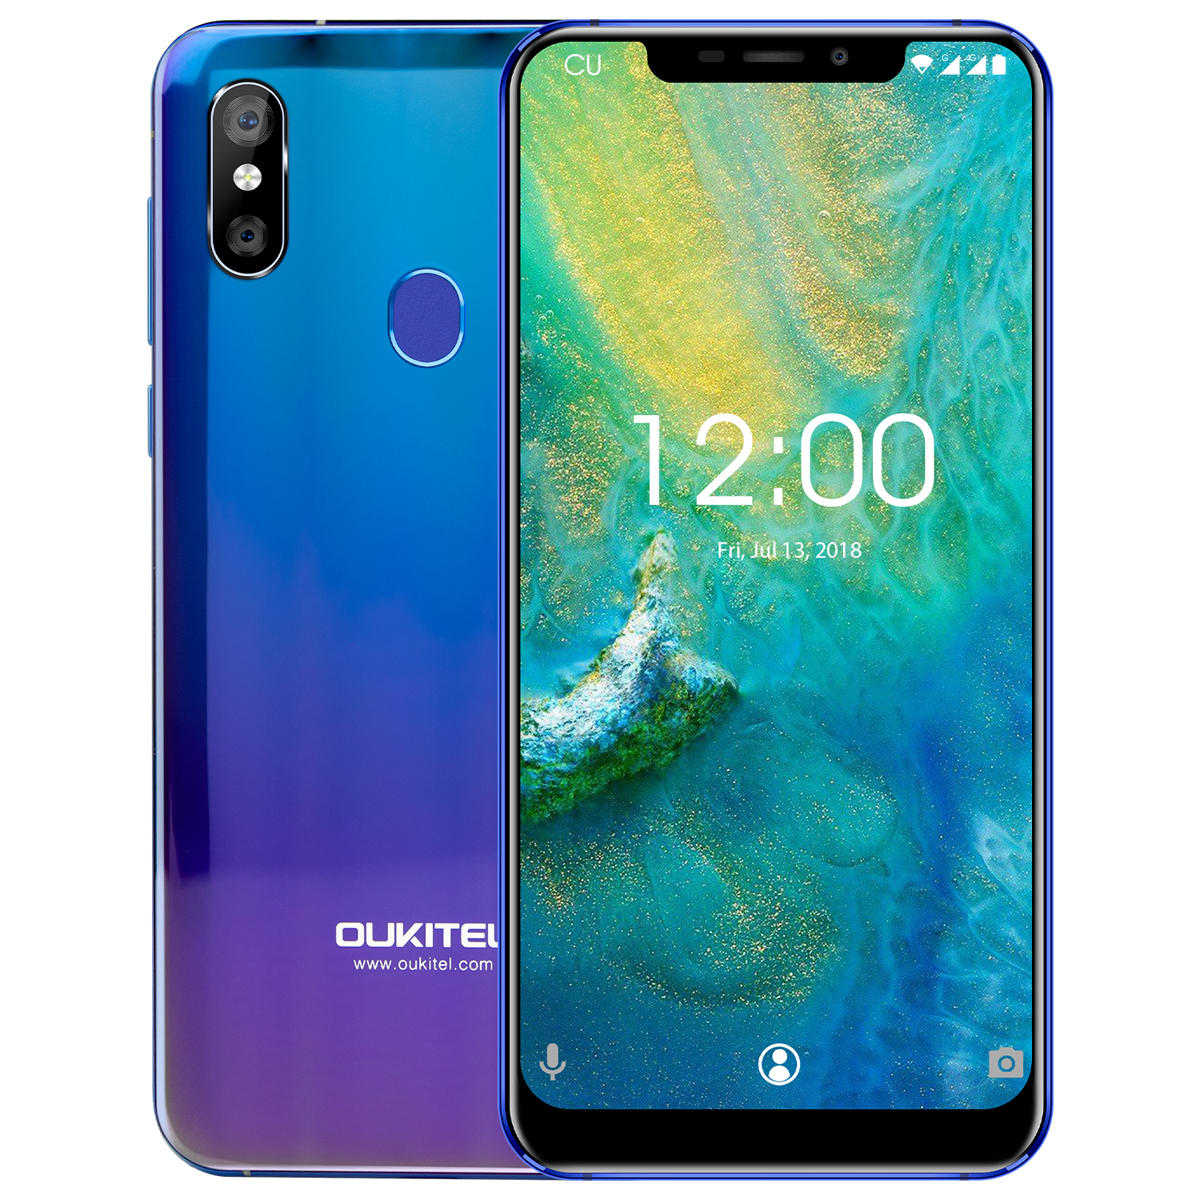 £168.94 15% OUKITEL U23 6.18 Inch FHD+ 3500mAh Wireless Charge 6GB RAM 64GB ROM Helio P23 Octa Core 2.0GHz 4G Smartphone Smartphones from Mobile Phones & Accessories on banggood.com